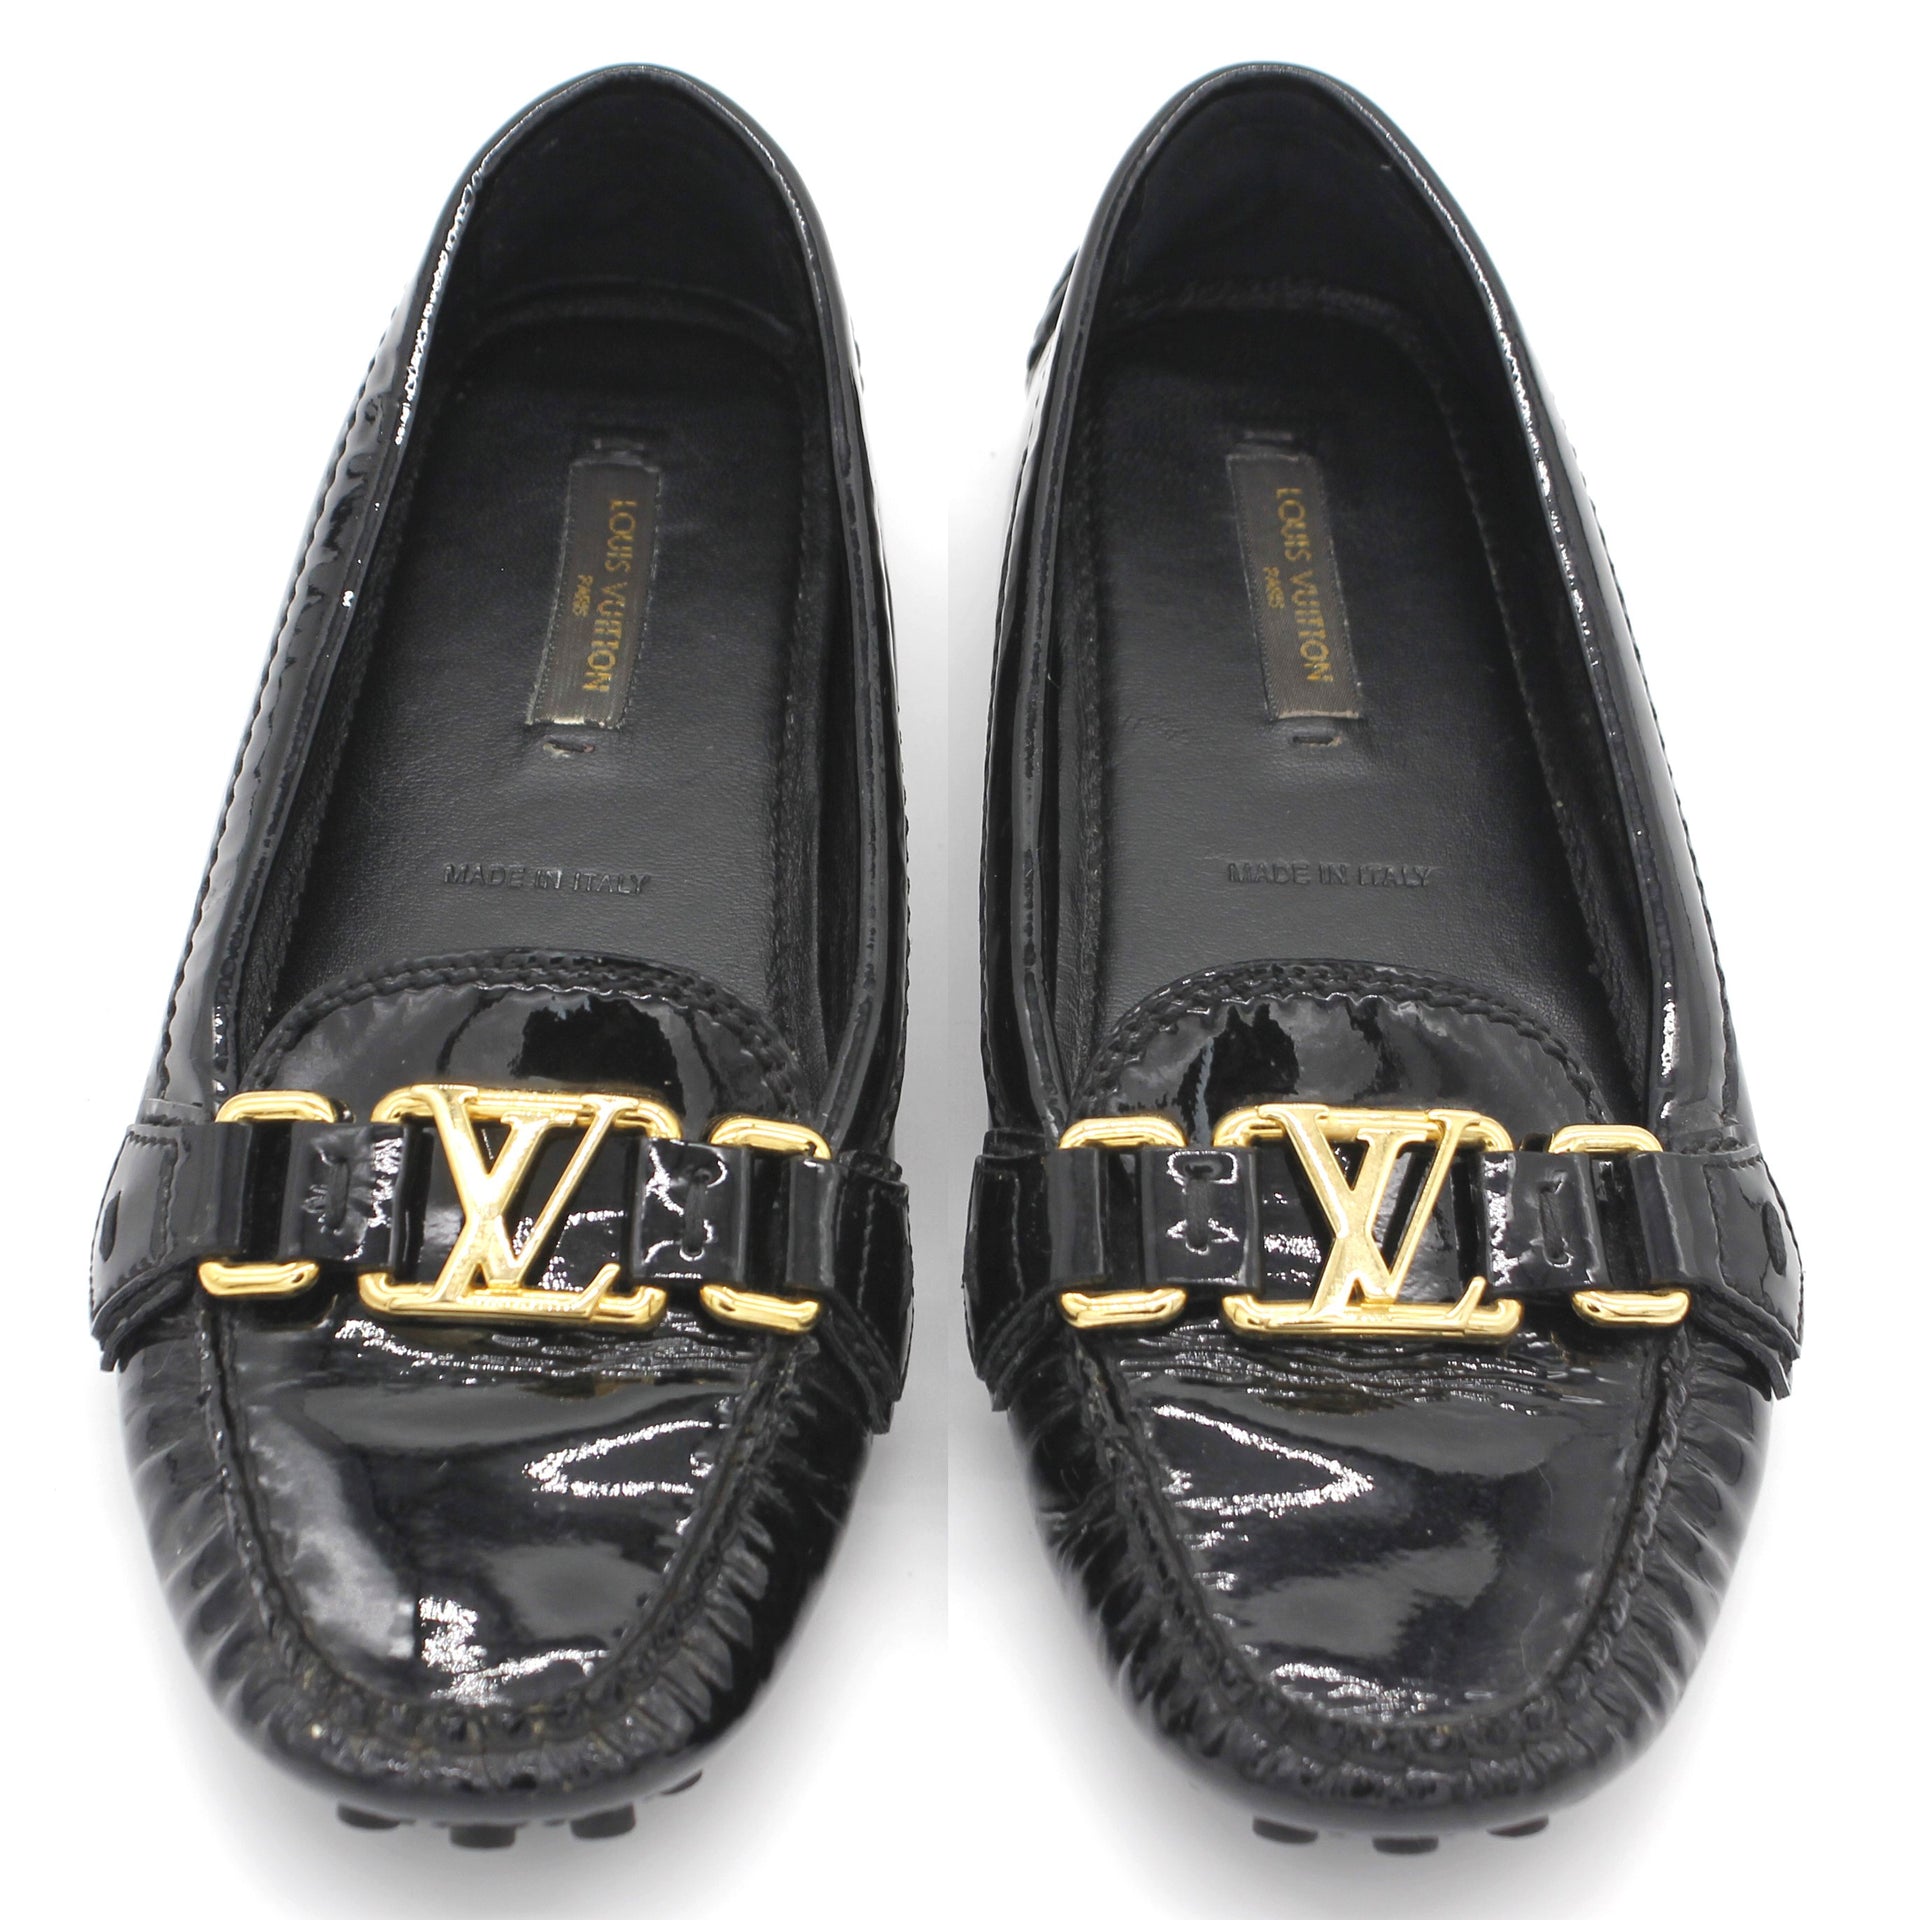 RARE Louis Vuitton EXOTIC LEATHER Moccasin Loafer Black size 9 US / 8 LV